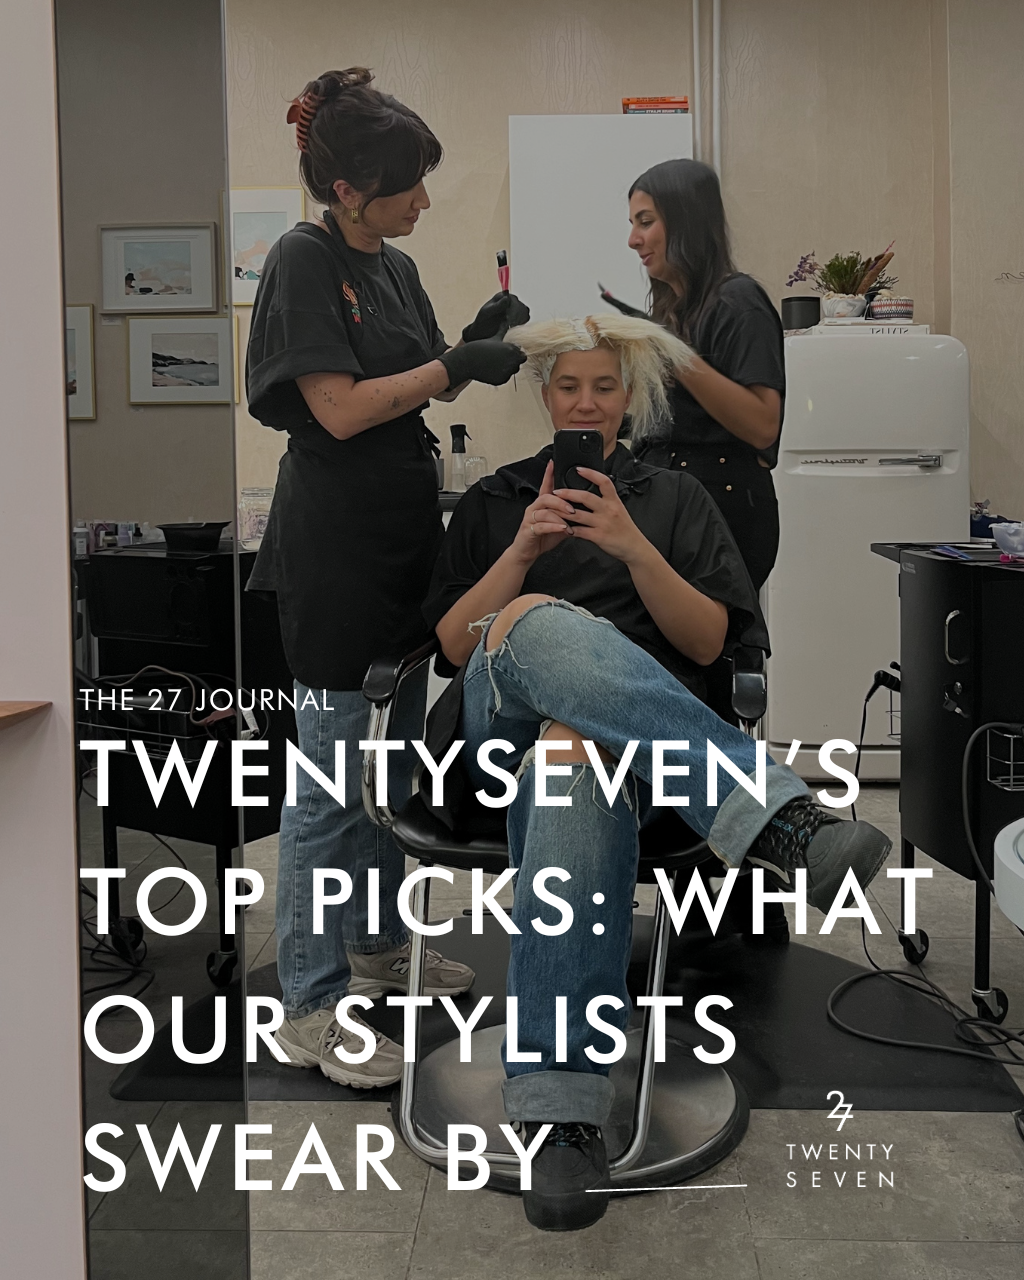 Twentyseven's Top Picks: What Our Stylists Swear By